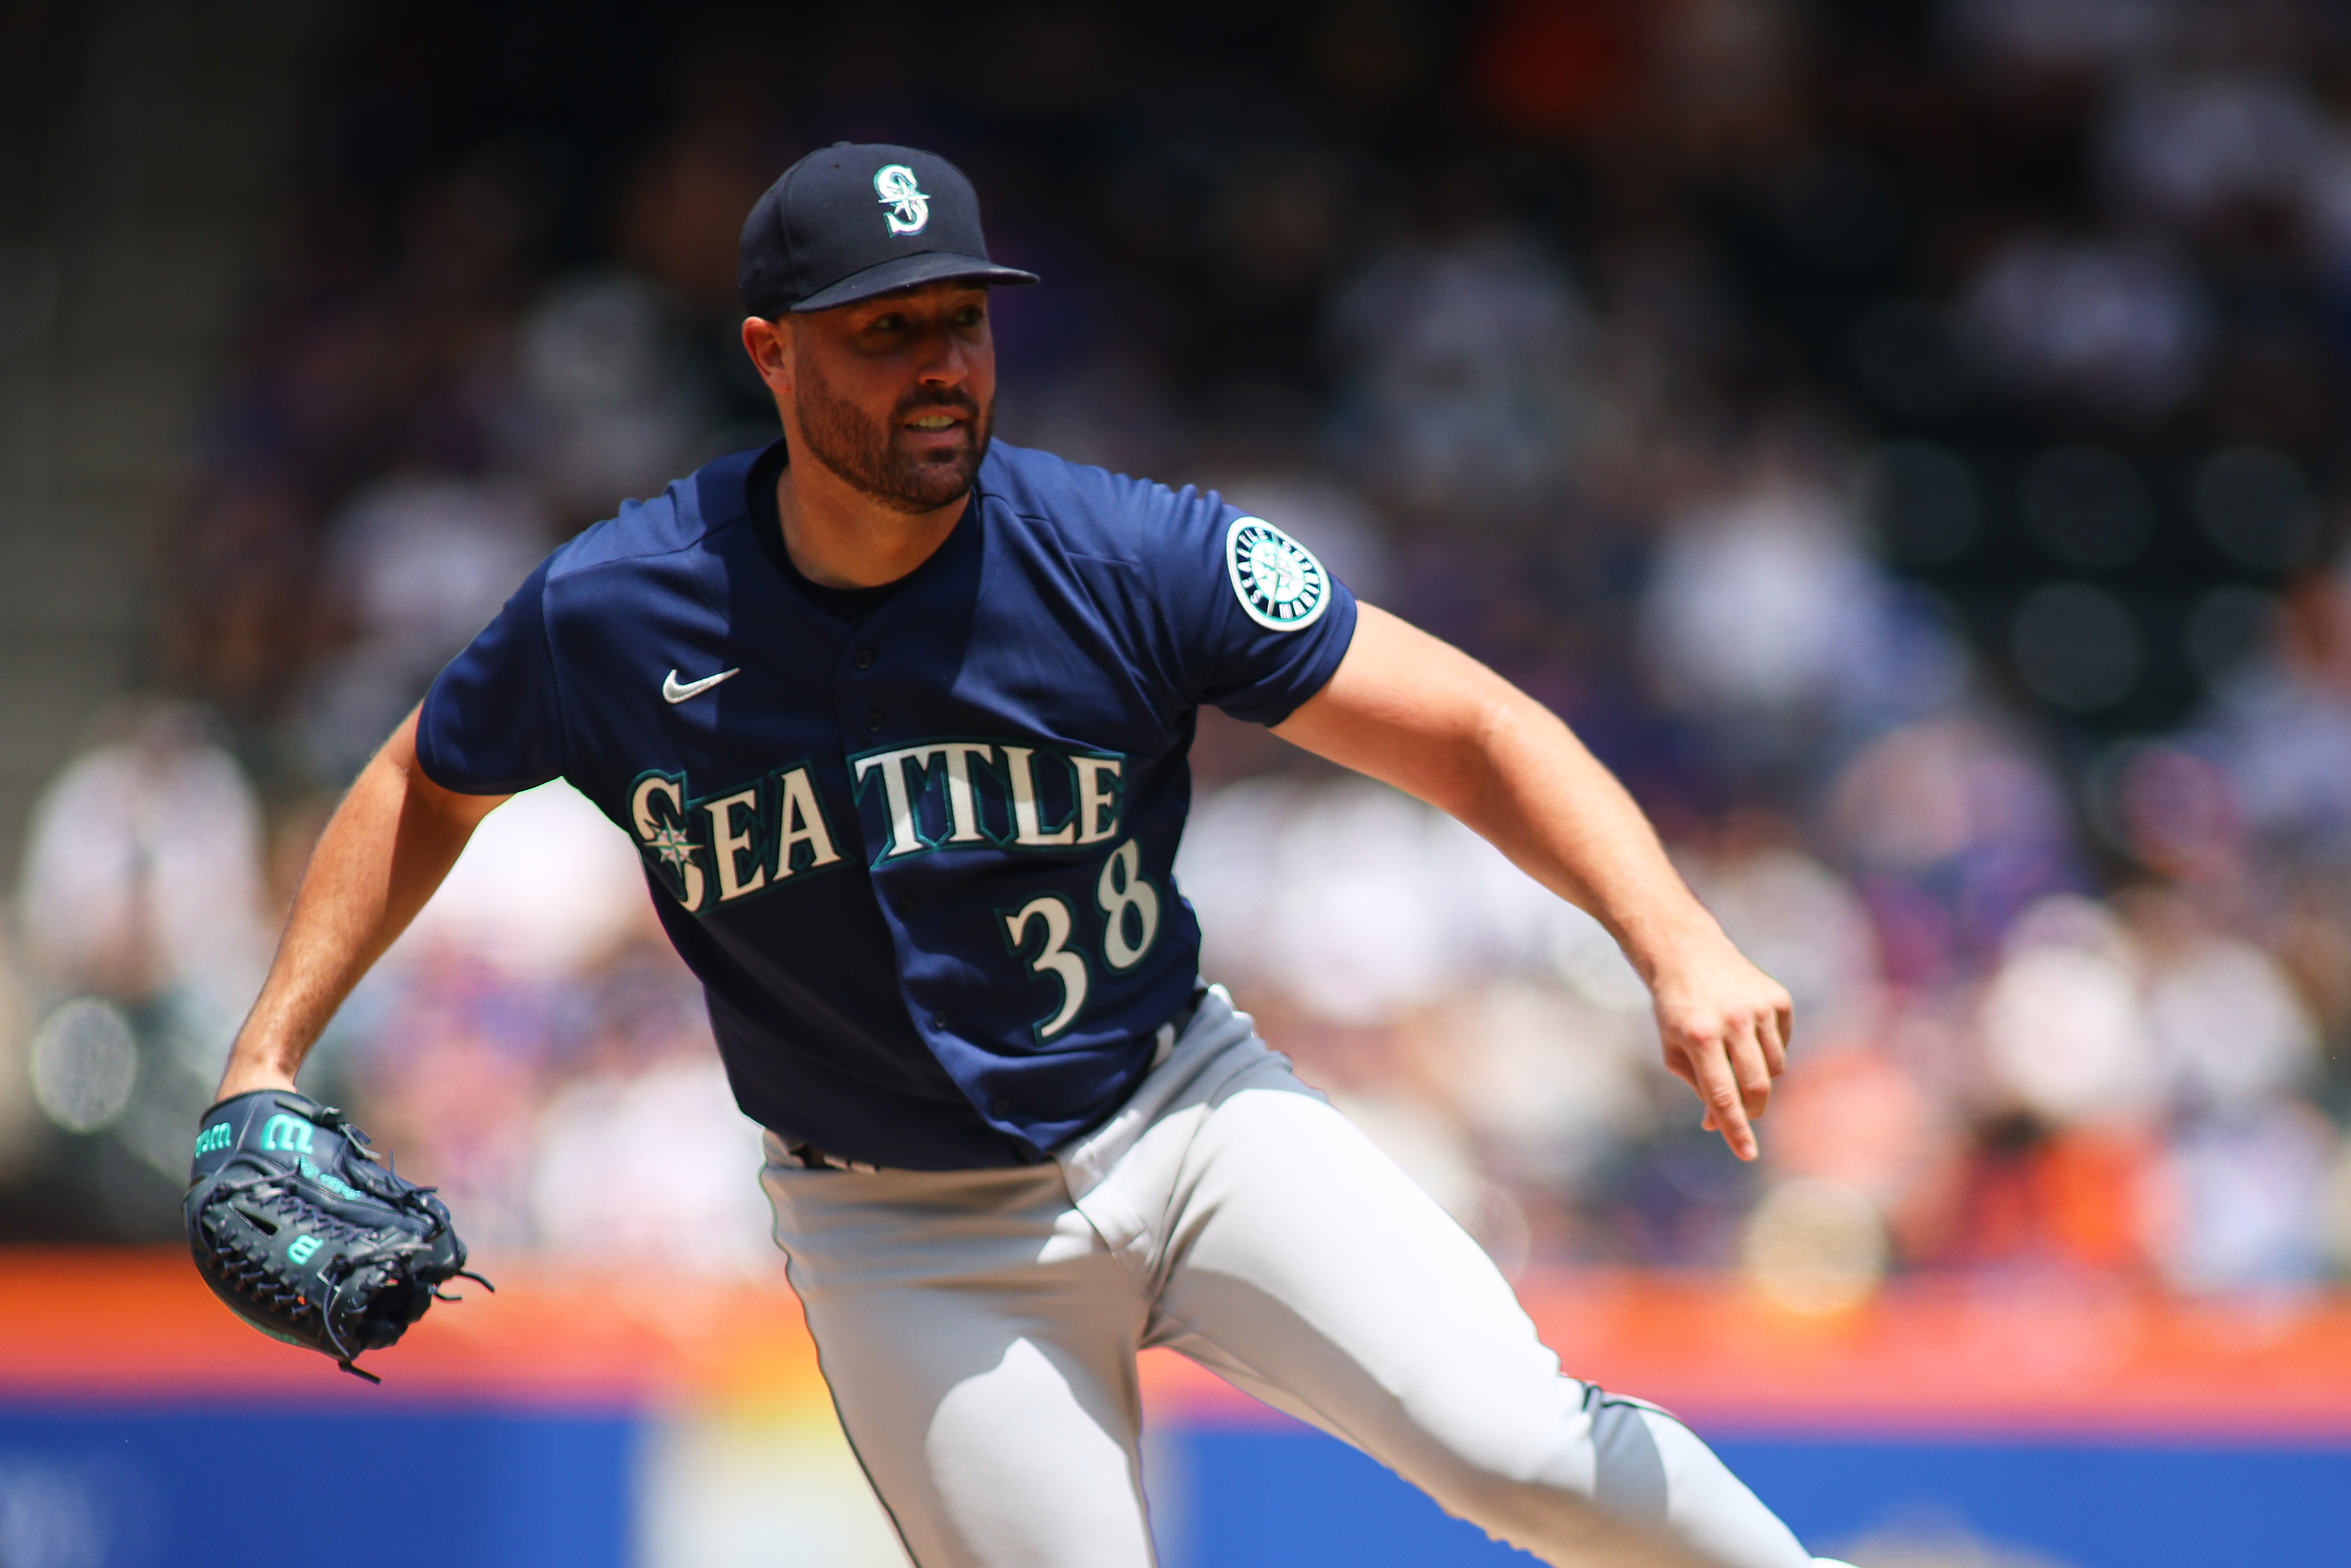 Where Do the Mariners Turn With Robbie Ray Out for the Year?